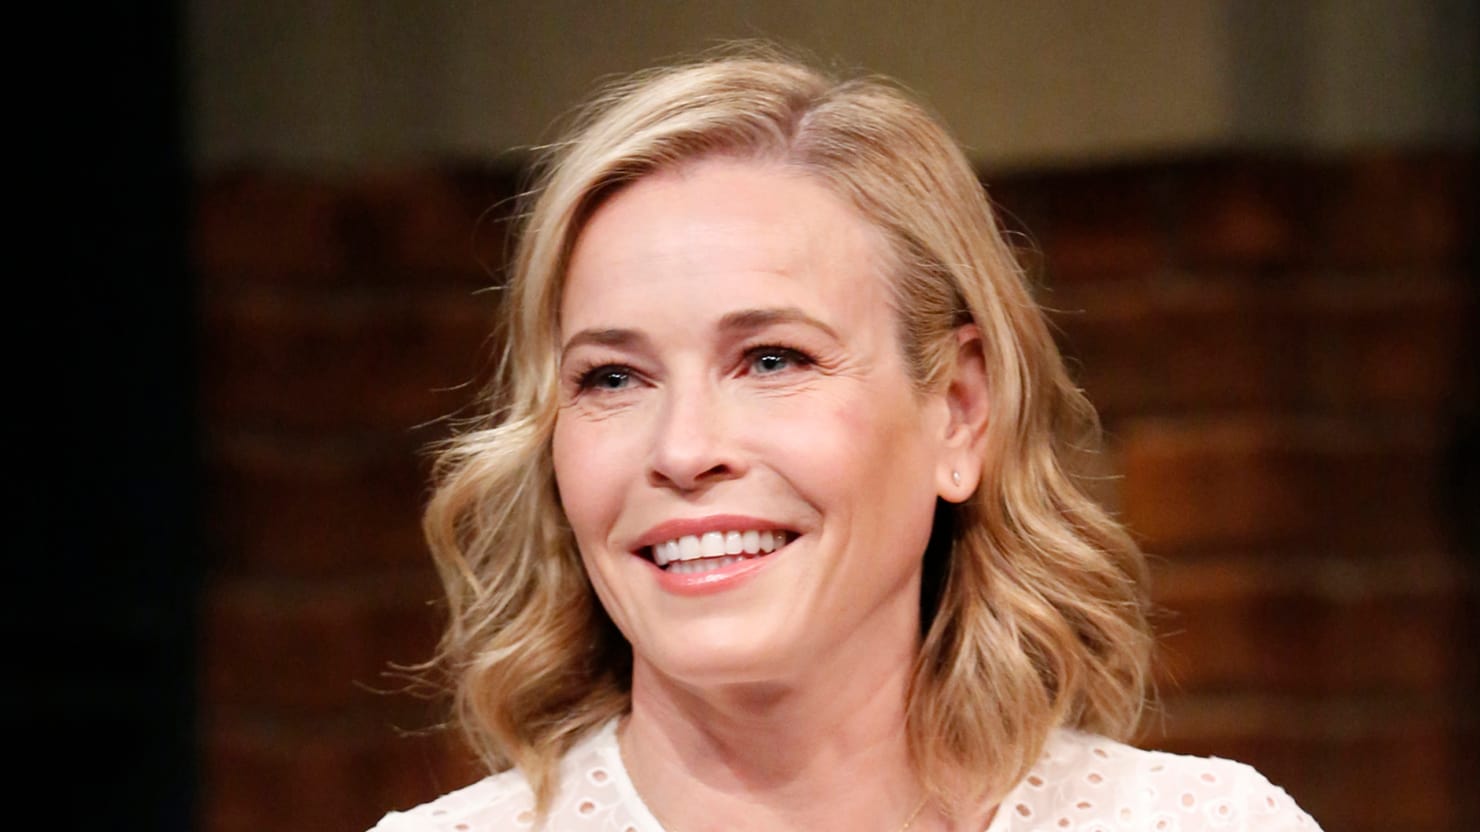 Chelsea Handler 1 Arena Pile Top 10 Hottest Female Comedians In The World